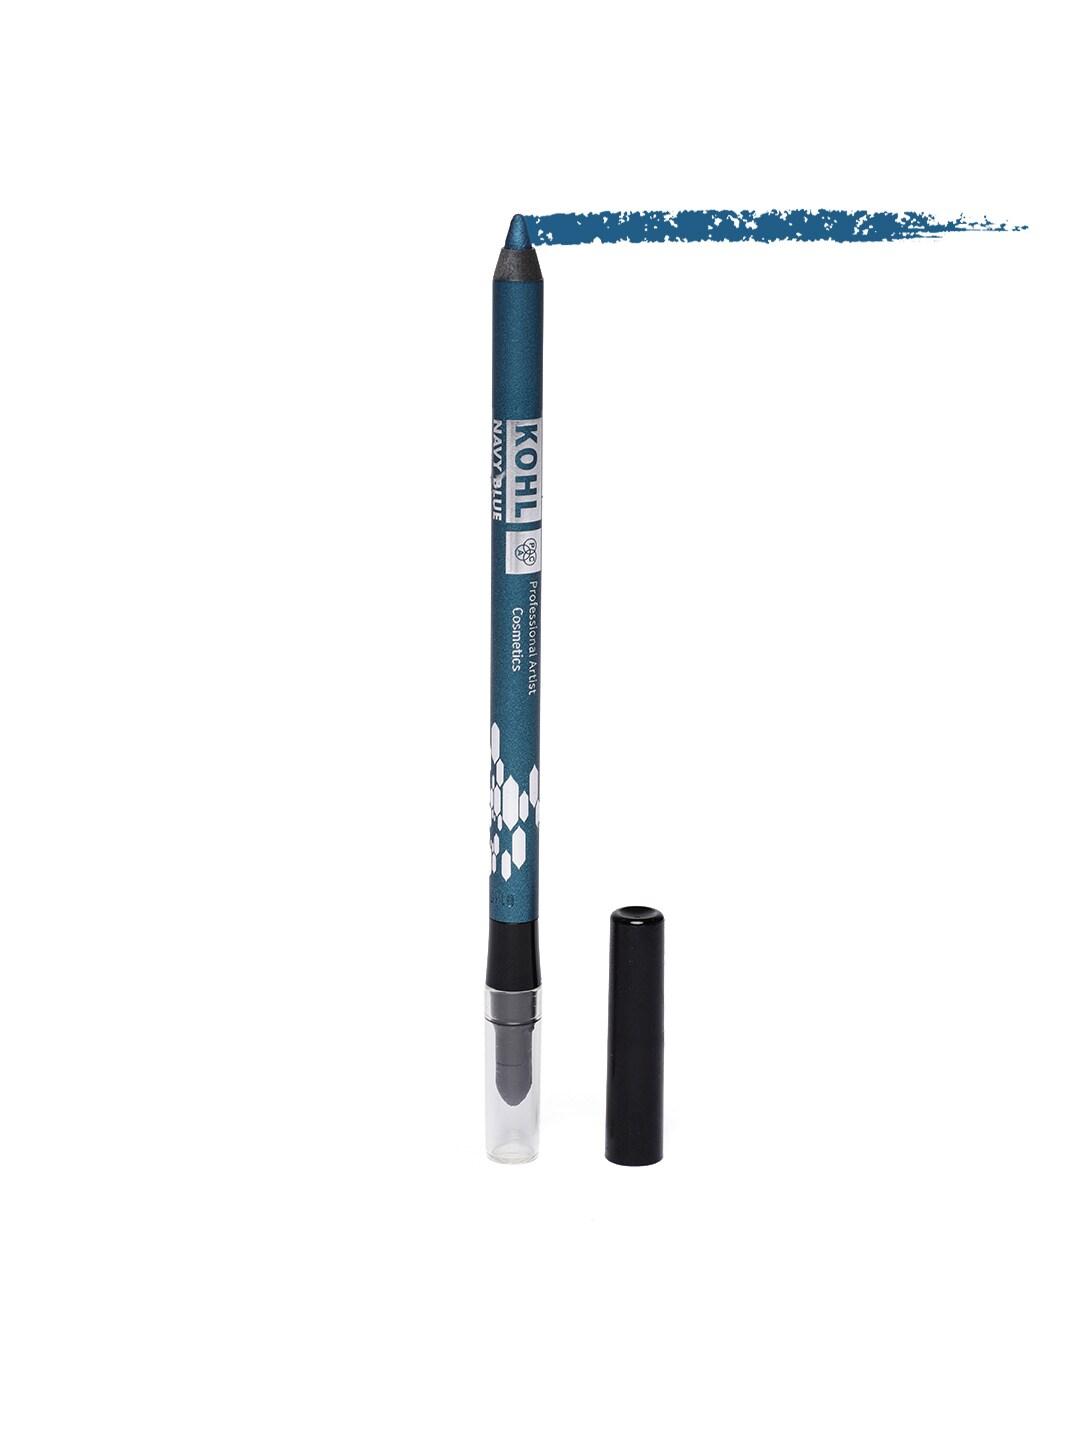 PAC Forest Navy Blue Longlasting Kohl Pencil 1.2 g